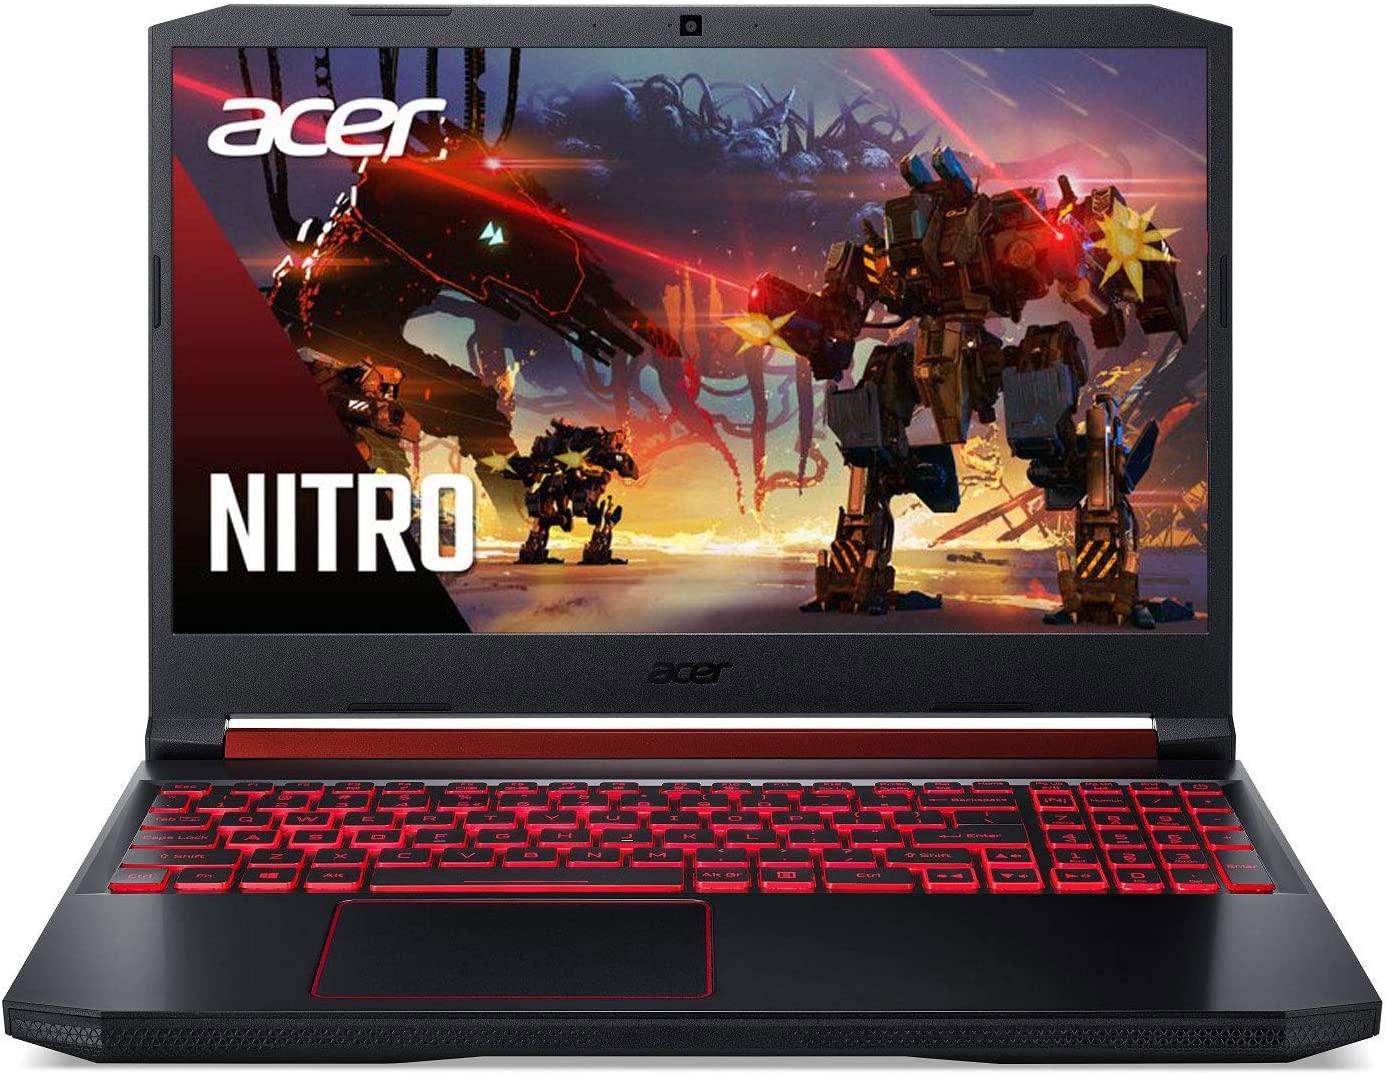 Acer Nitro 5 15.6in i7 16GB 256GB NVMe SSD Gaming Laptop for $899.99 Shipped